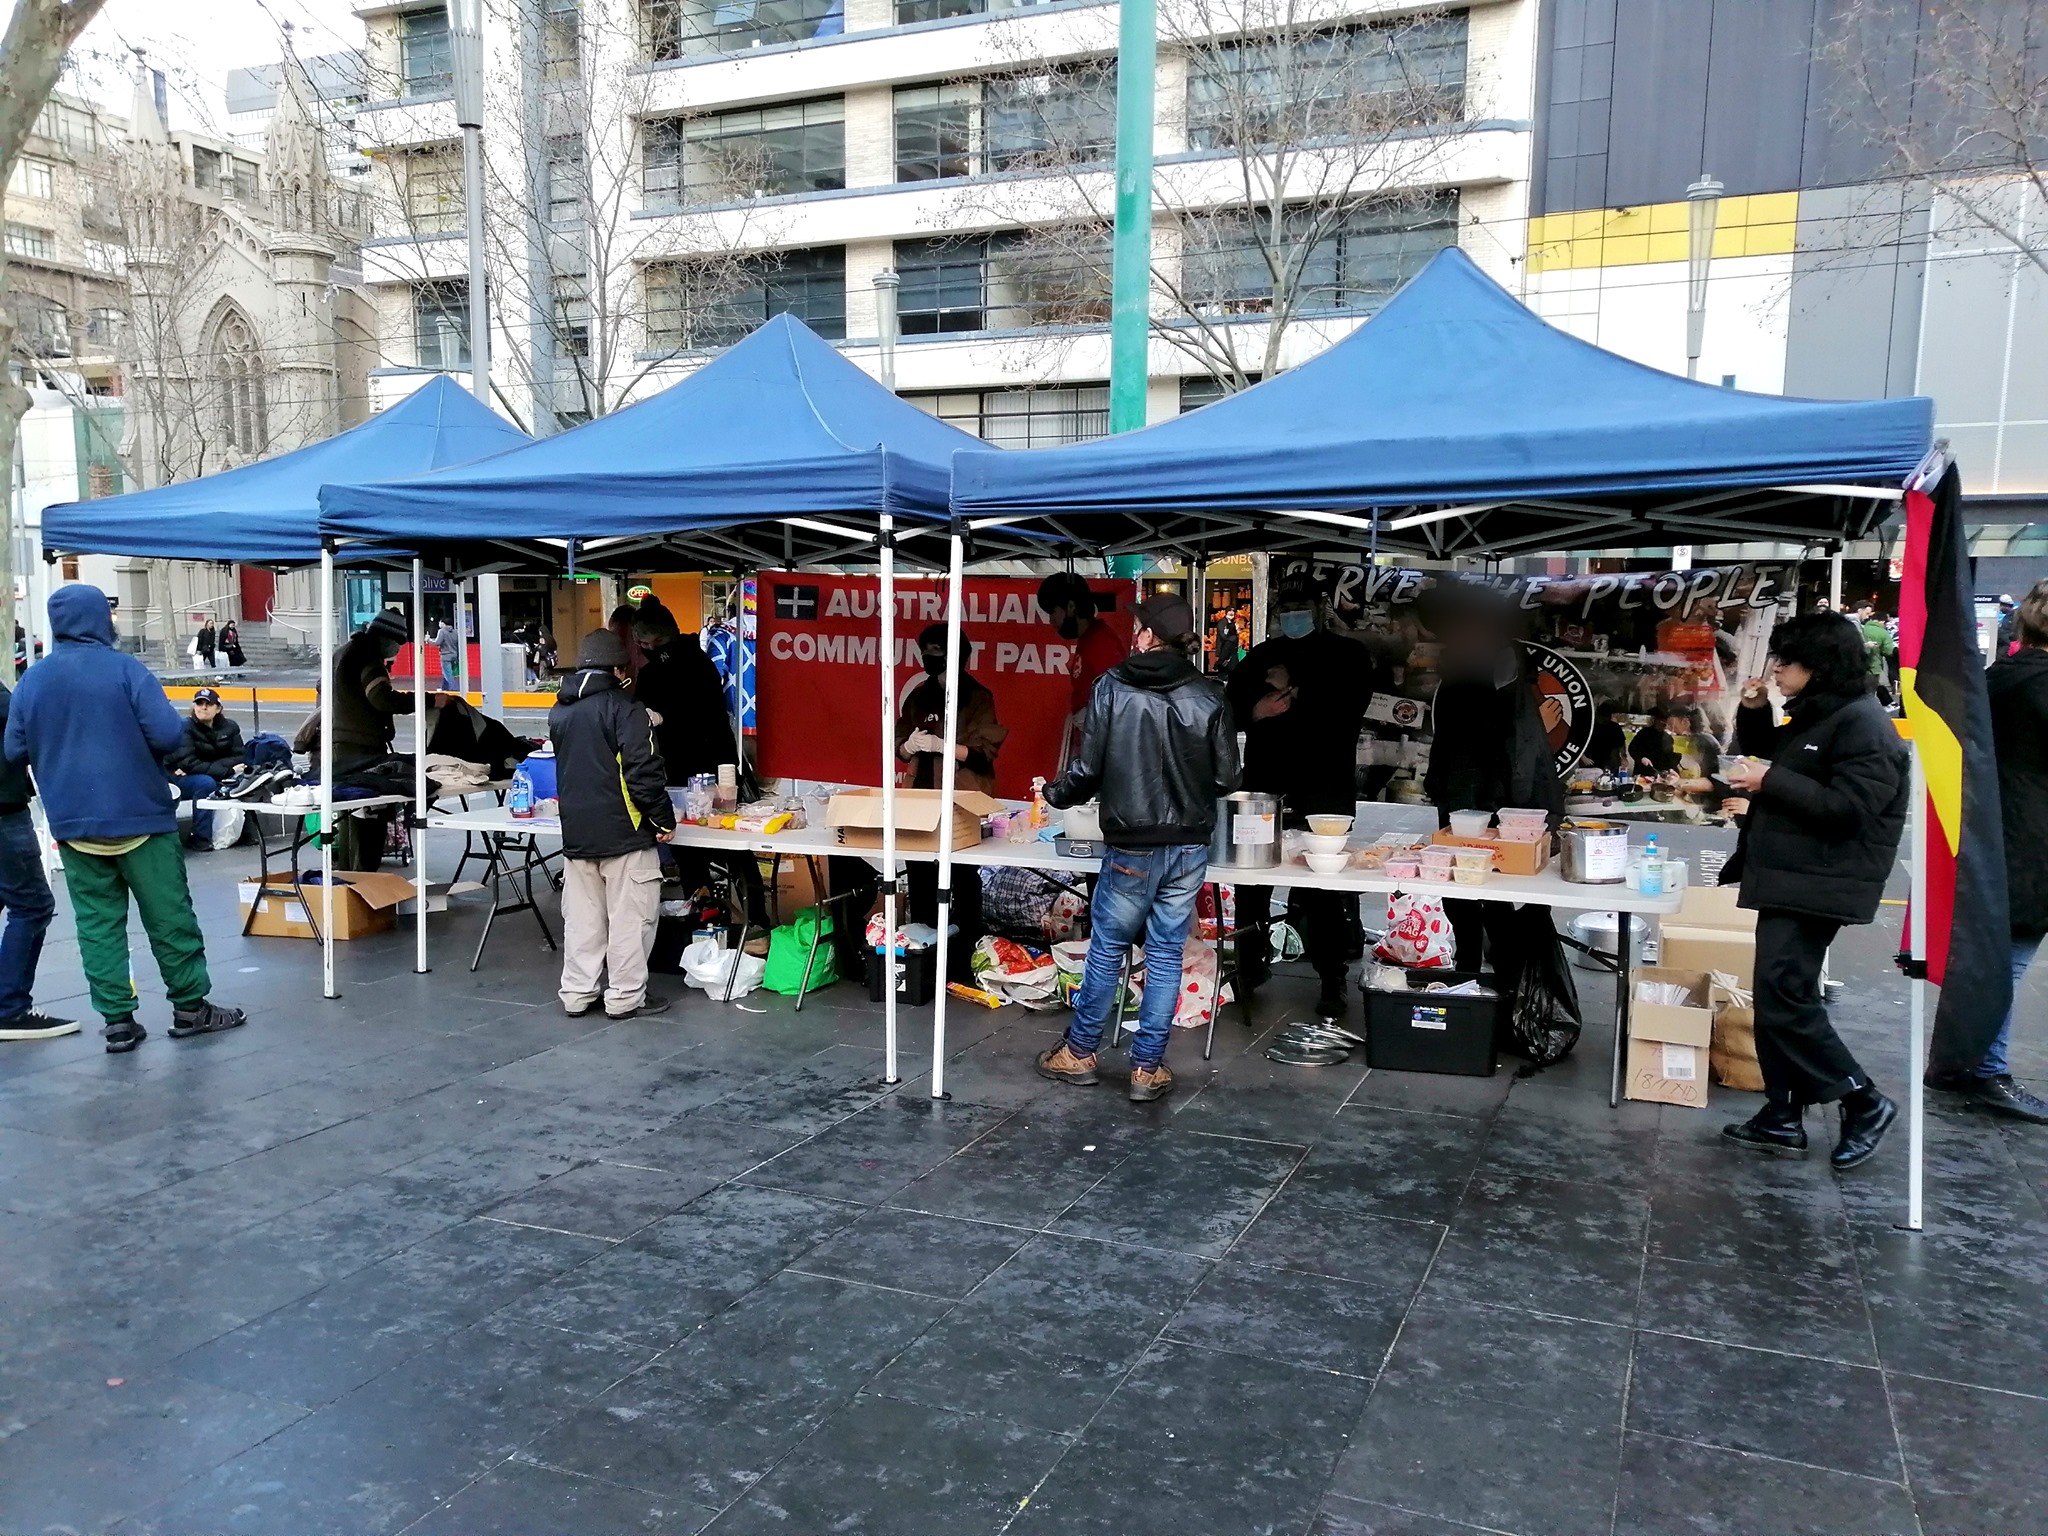 Community Union Defence League's street kitchen in the CBD- a stall under two marquees with volunteers handing out food.